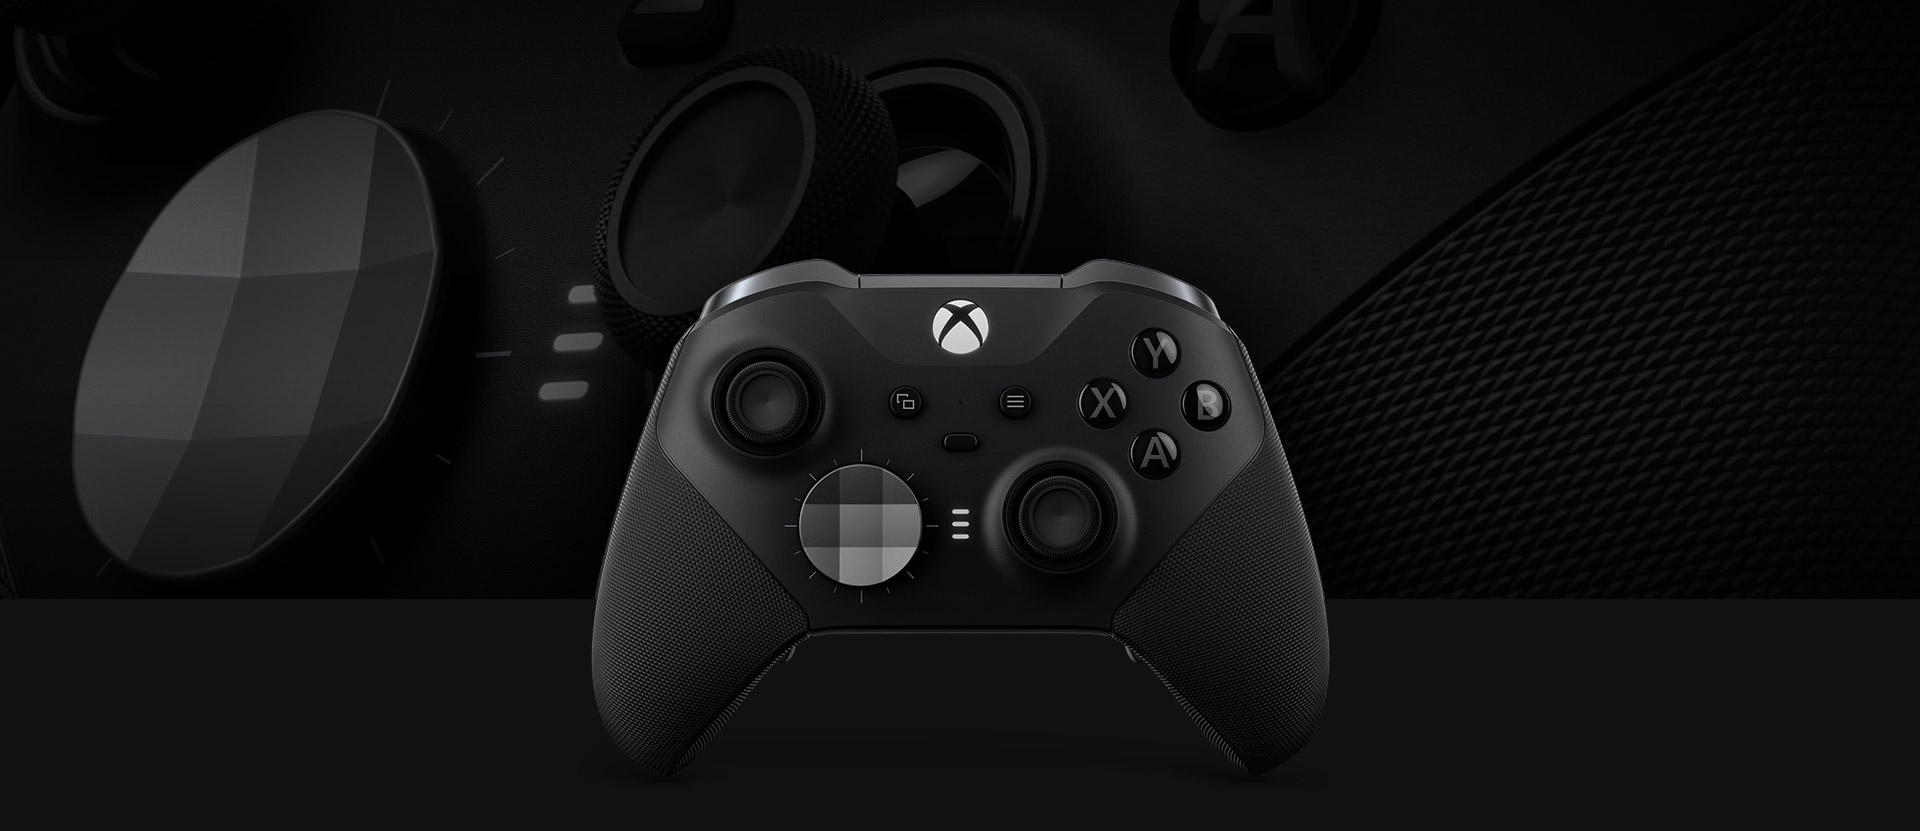 Front view of the Xbox Elite Wireless controller series 2 with a close up of the controller in the background